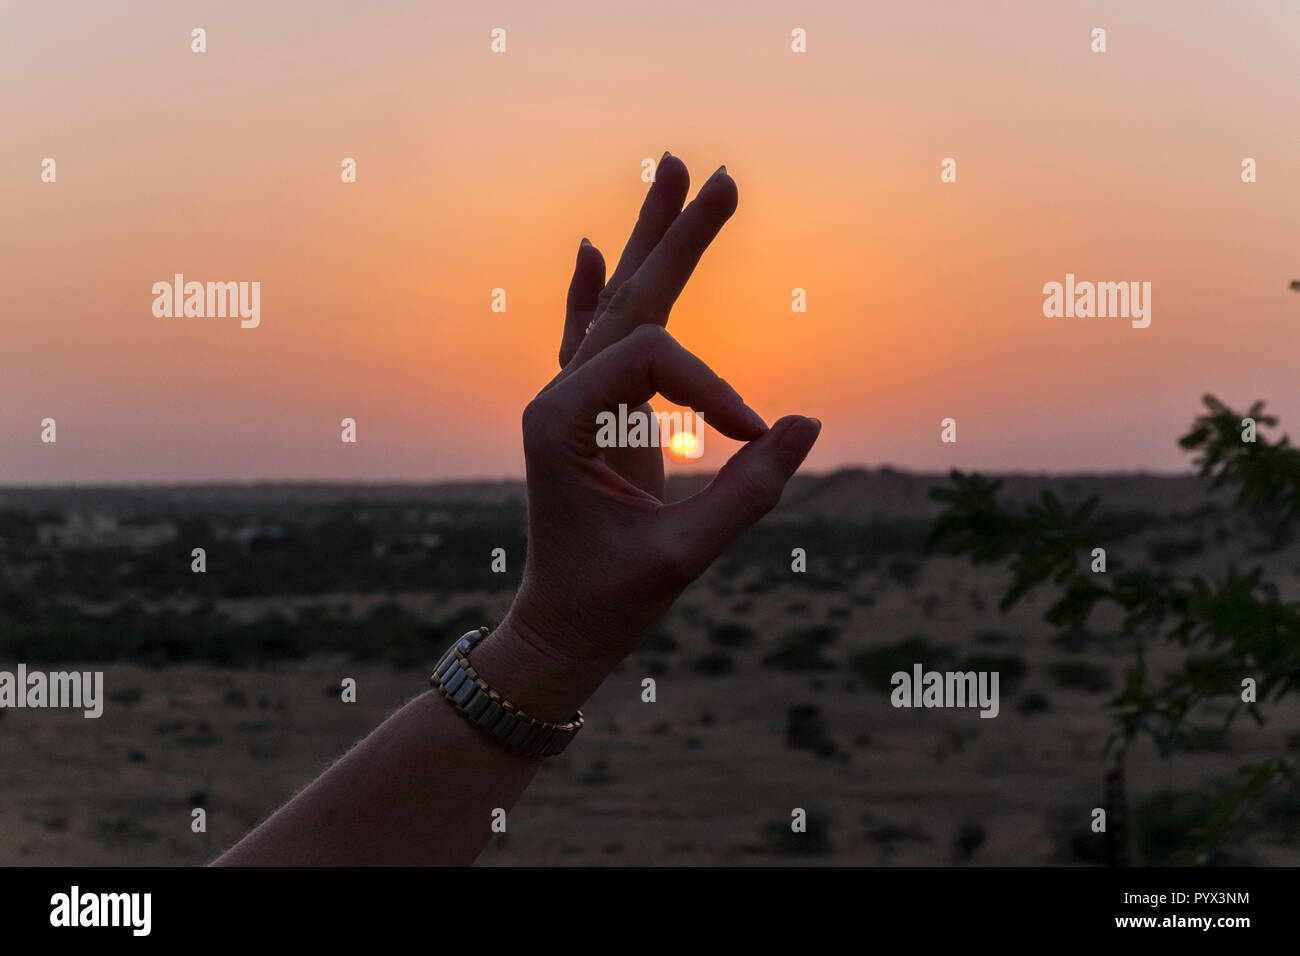 Hand making OK gesture in front of setting sun Stock Photo